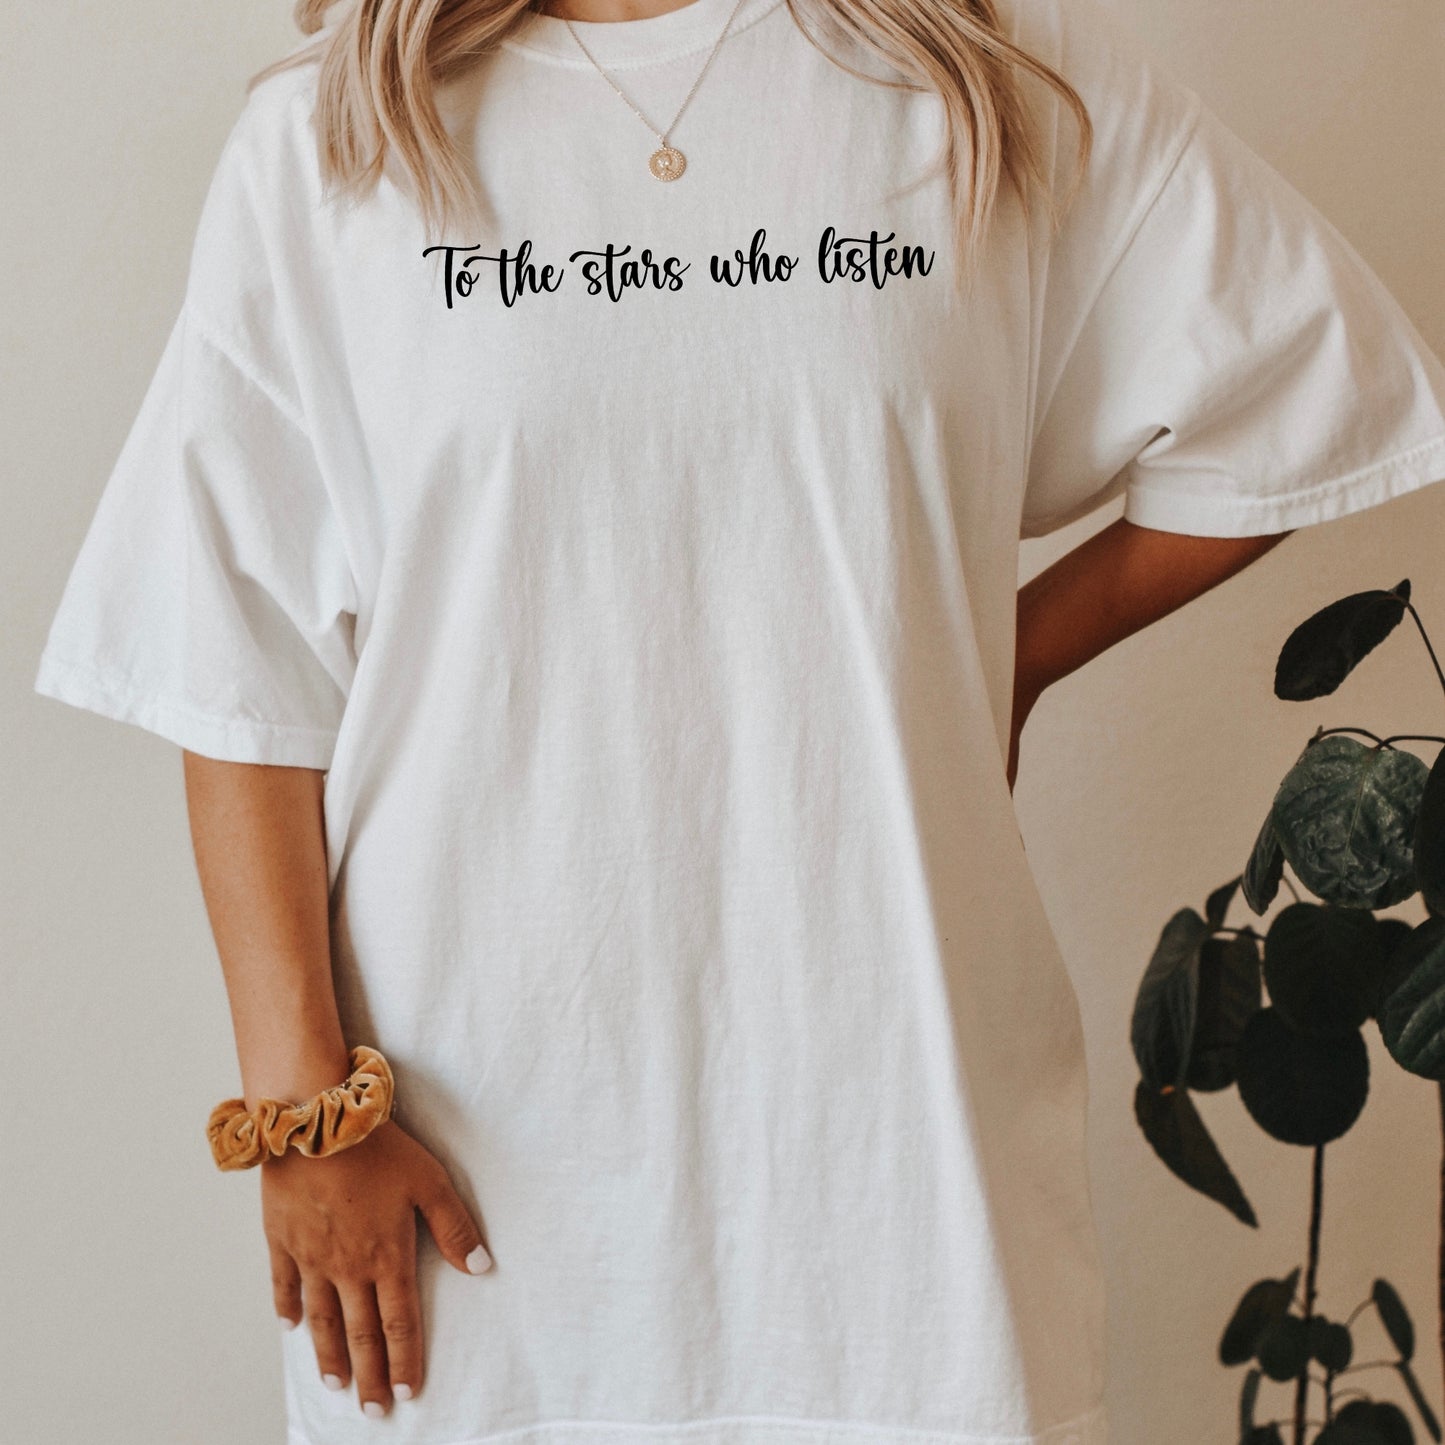 To the stars who listen White Comfort Colors T-Shirt